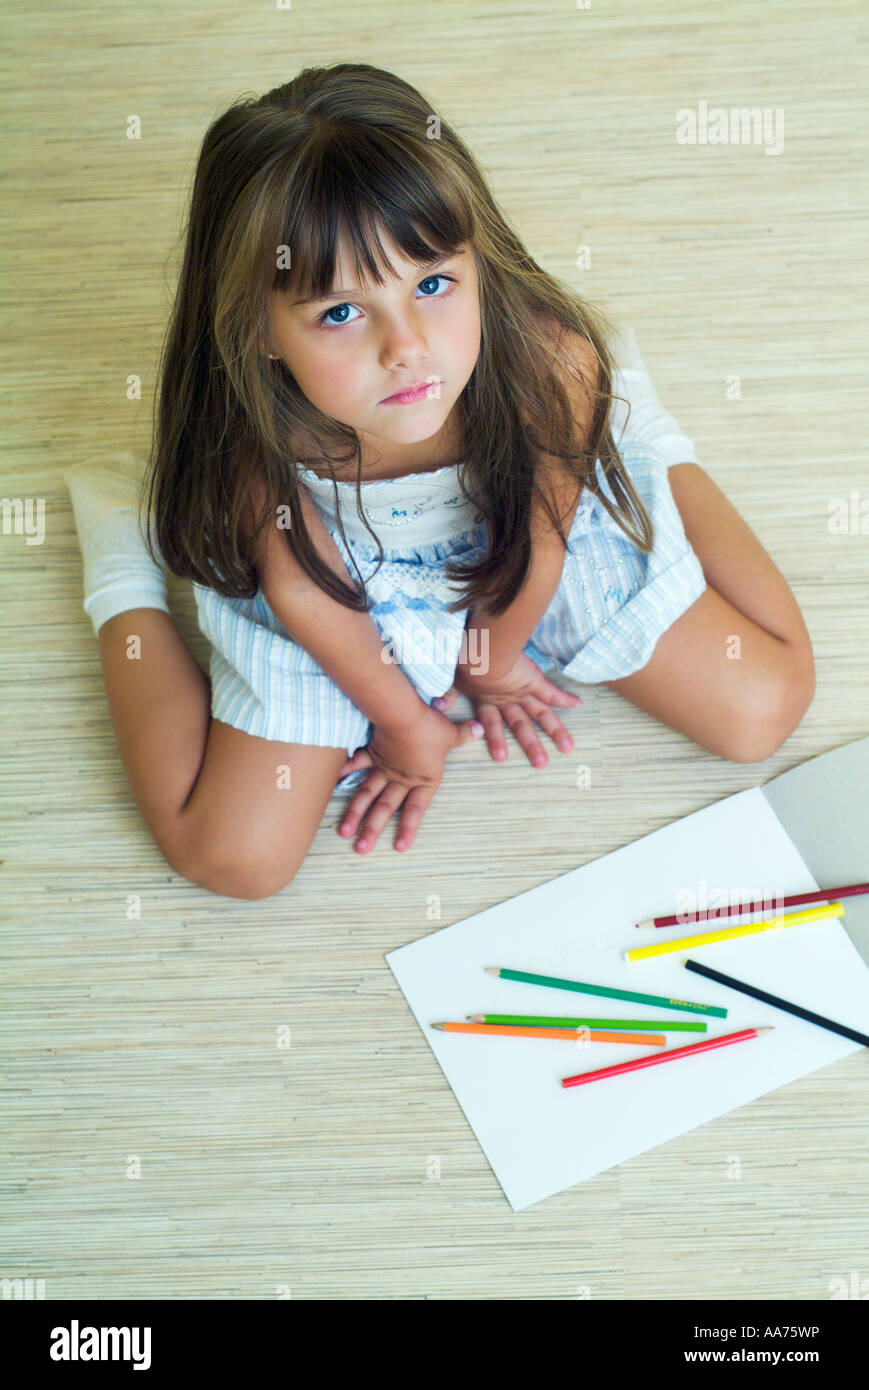 Girl coloring with colored pencils Stock Photo